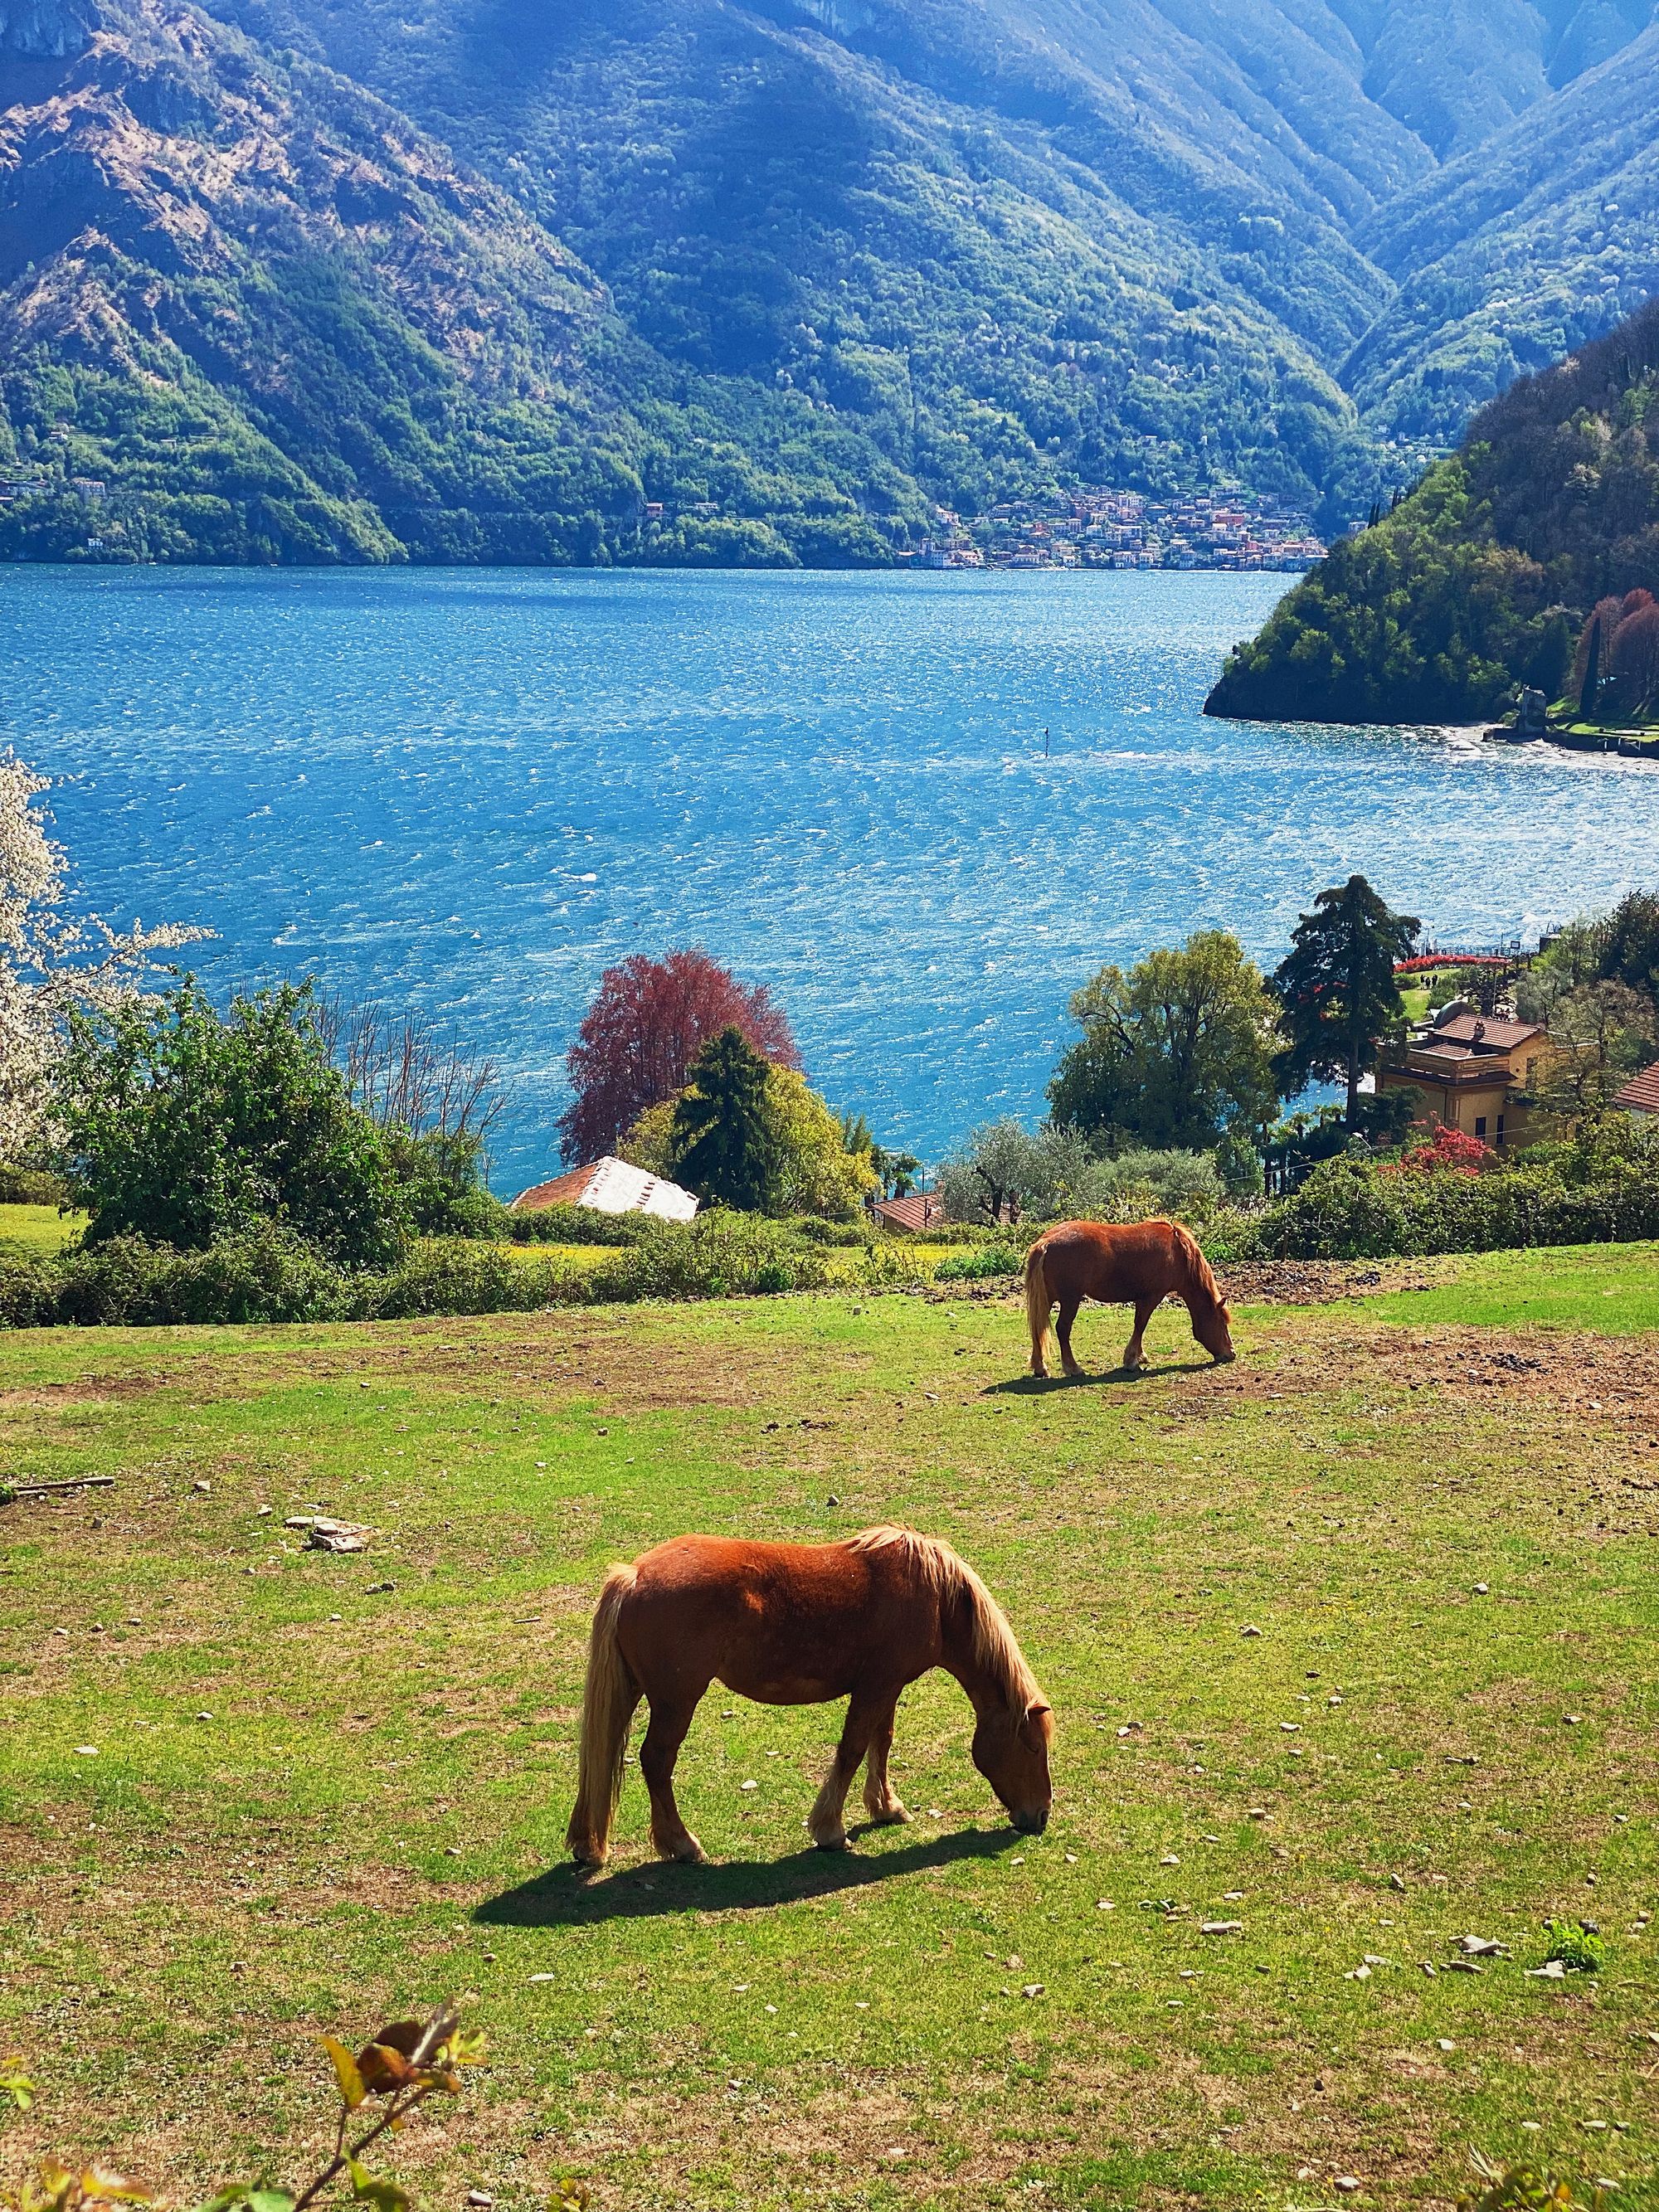 Horses grazing on a green pasture with Lake Como seen in the background